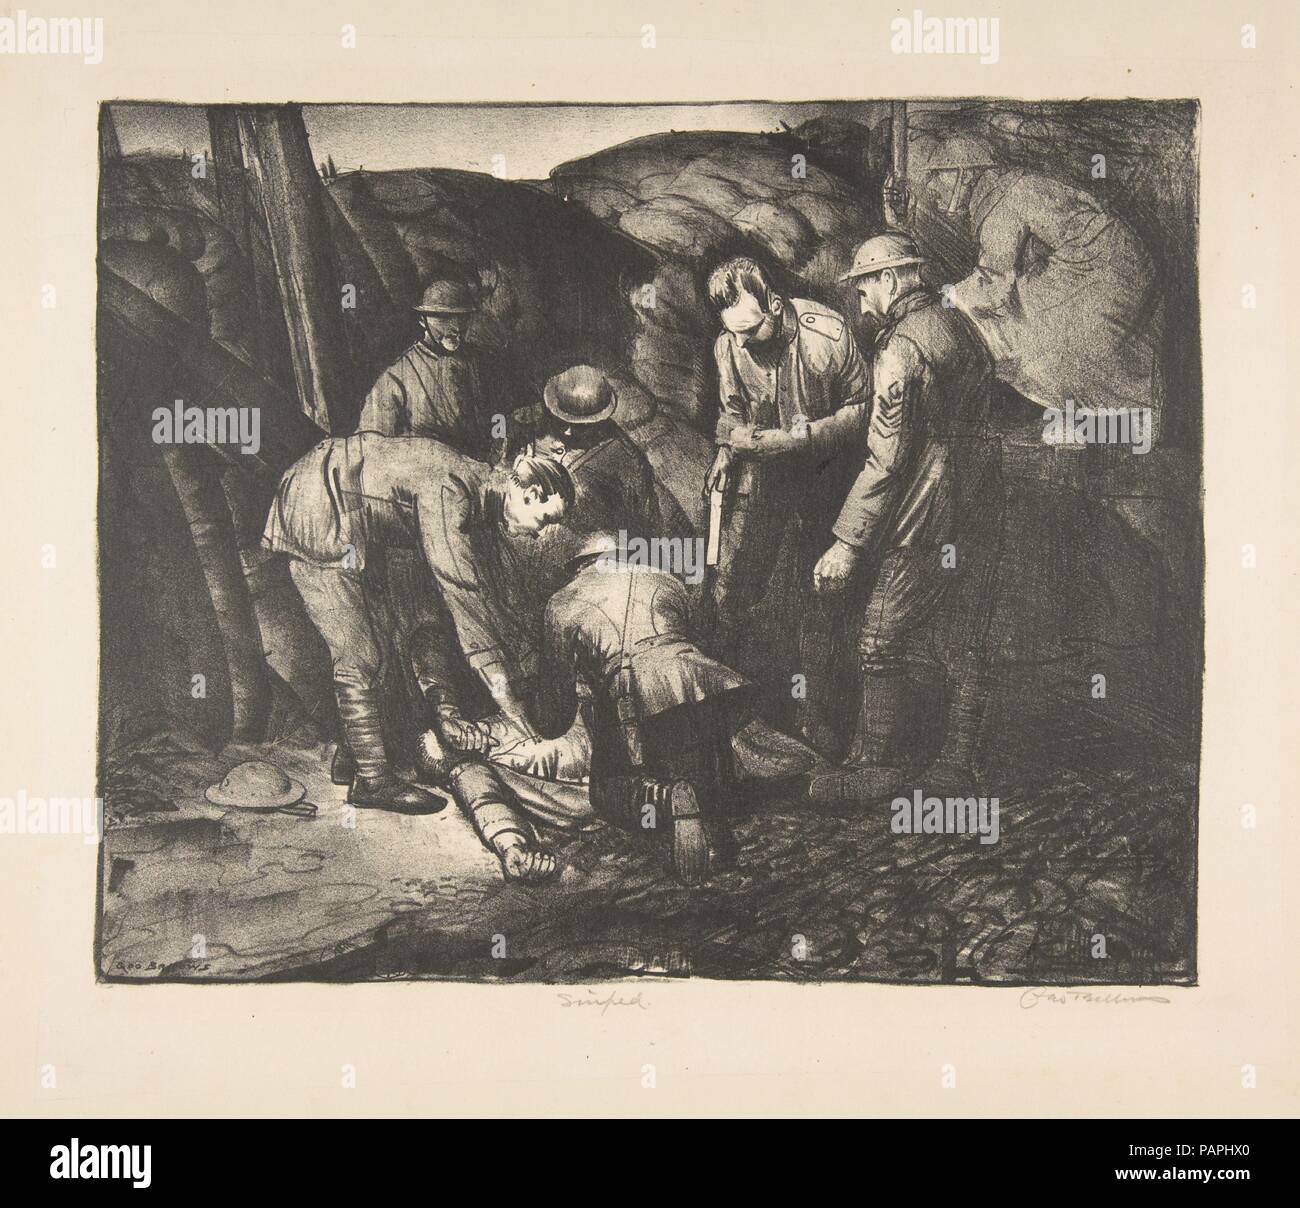 Sniped from War Series. Artist: George Bellows (American, Columbus, Ohio 1882-1925 New York). Dimensions: image: 8 7/8 x 11 1/8 in. (22.5 x 28.3 cm)  sheet: 10 11/16 x 12 1/2 in. (27.1 x 31.8 cm). Date: 1918.  Sniped is a poignant image of soldiers in a trench encircling a fallen comrade. Bellows does not reveal whether the man has been wounded or killed by the unseen sniper, focusing instead on the group of soldiers and the omnipresent sense of death. The constant threat of danger is reinforced by the faint image of the soldier poised with his gun on the upper right, separated from the others Stock Photo